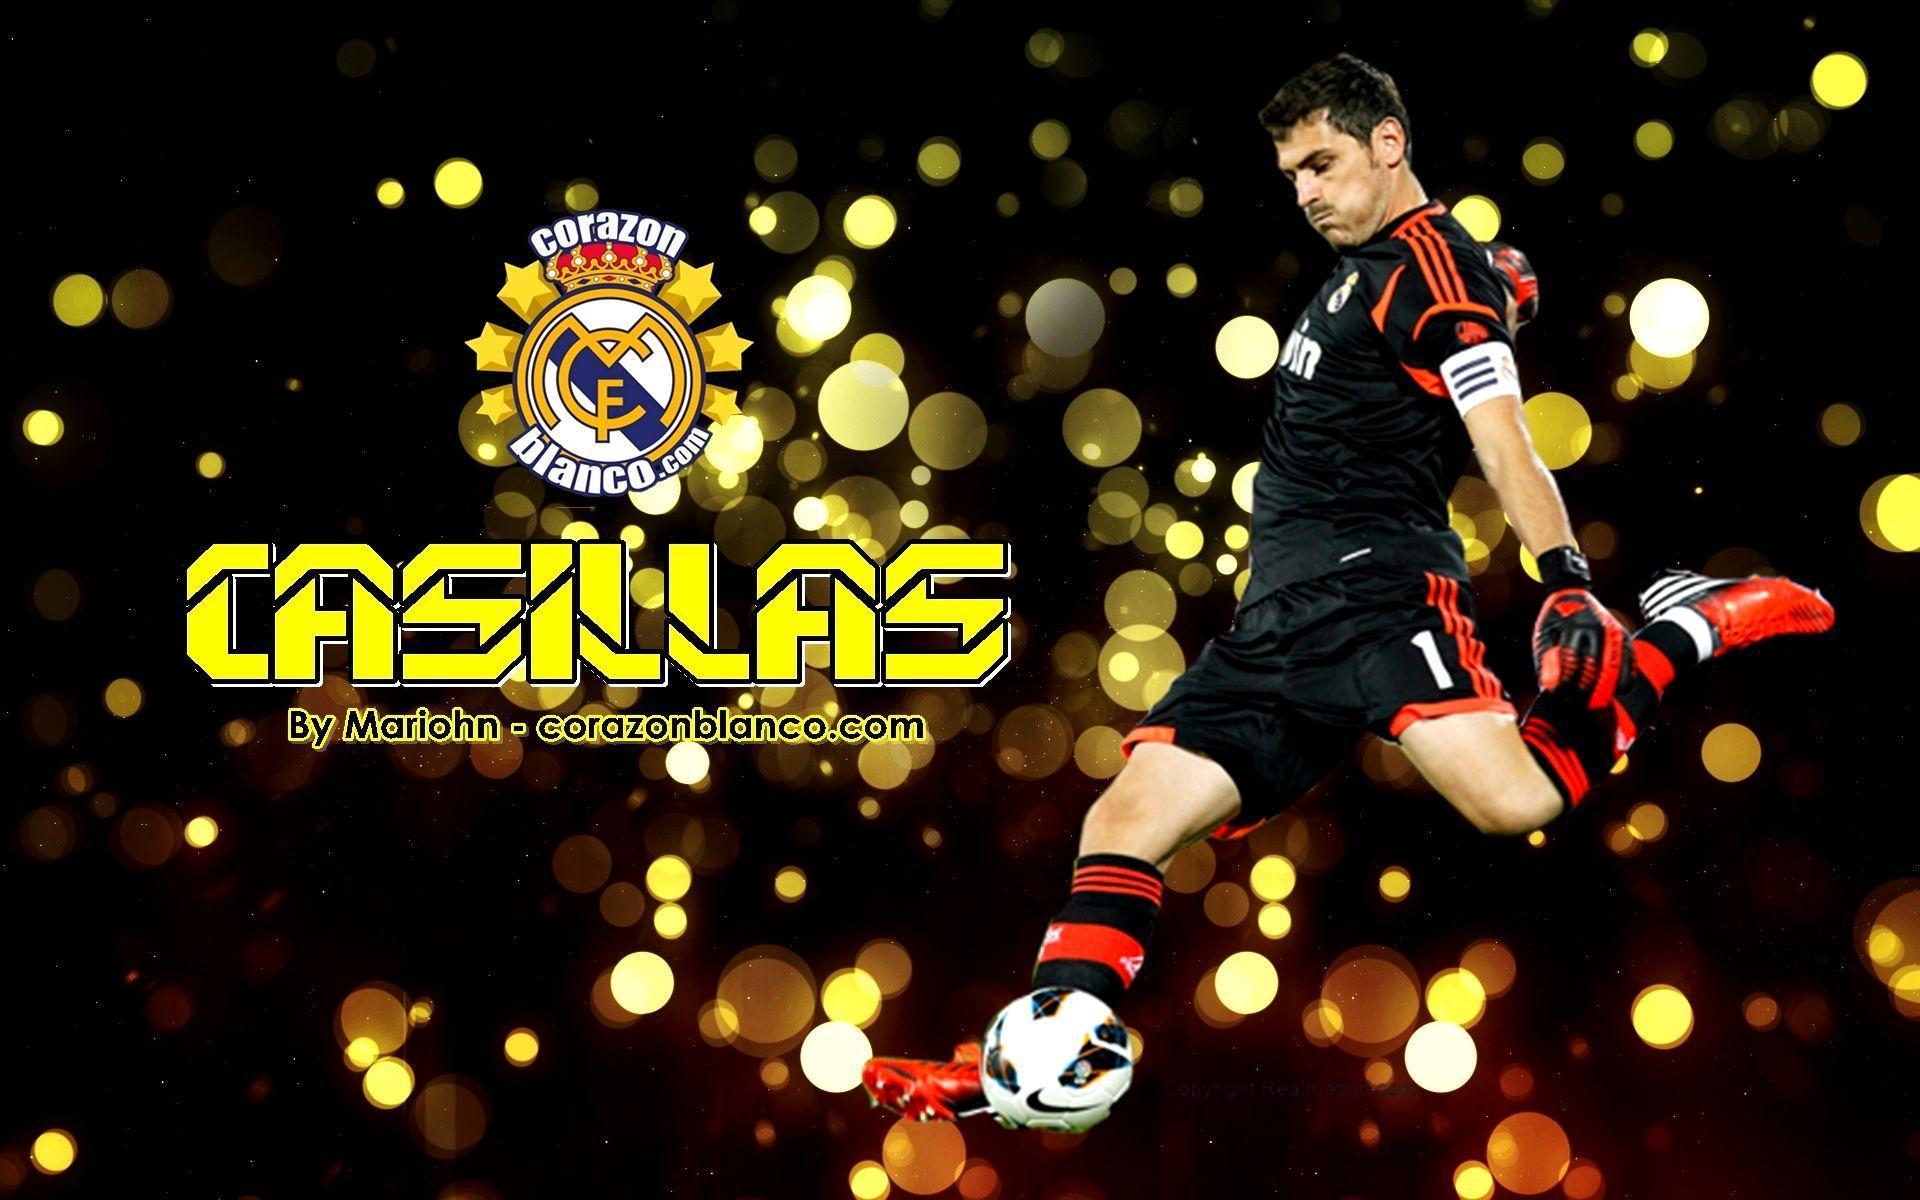 The goalkeeper Real Madrid Iker Casillas wallpaper and image